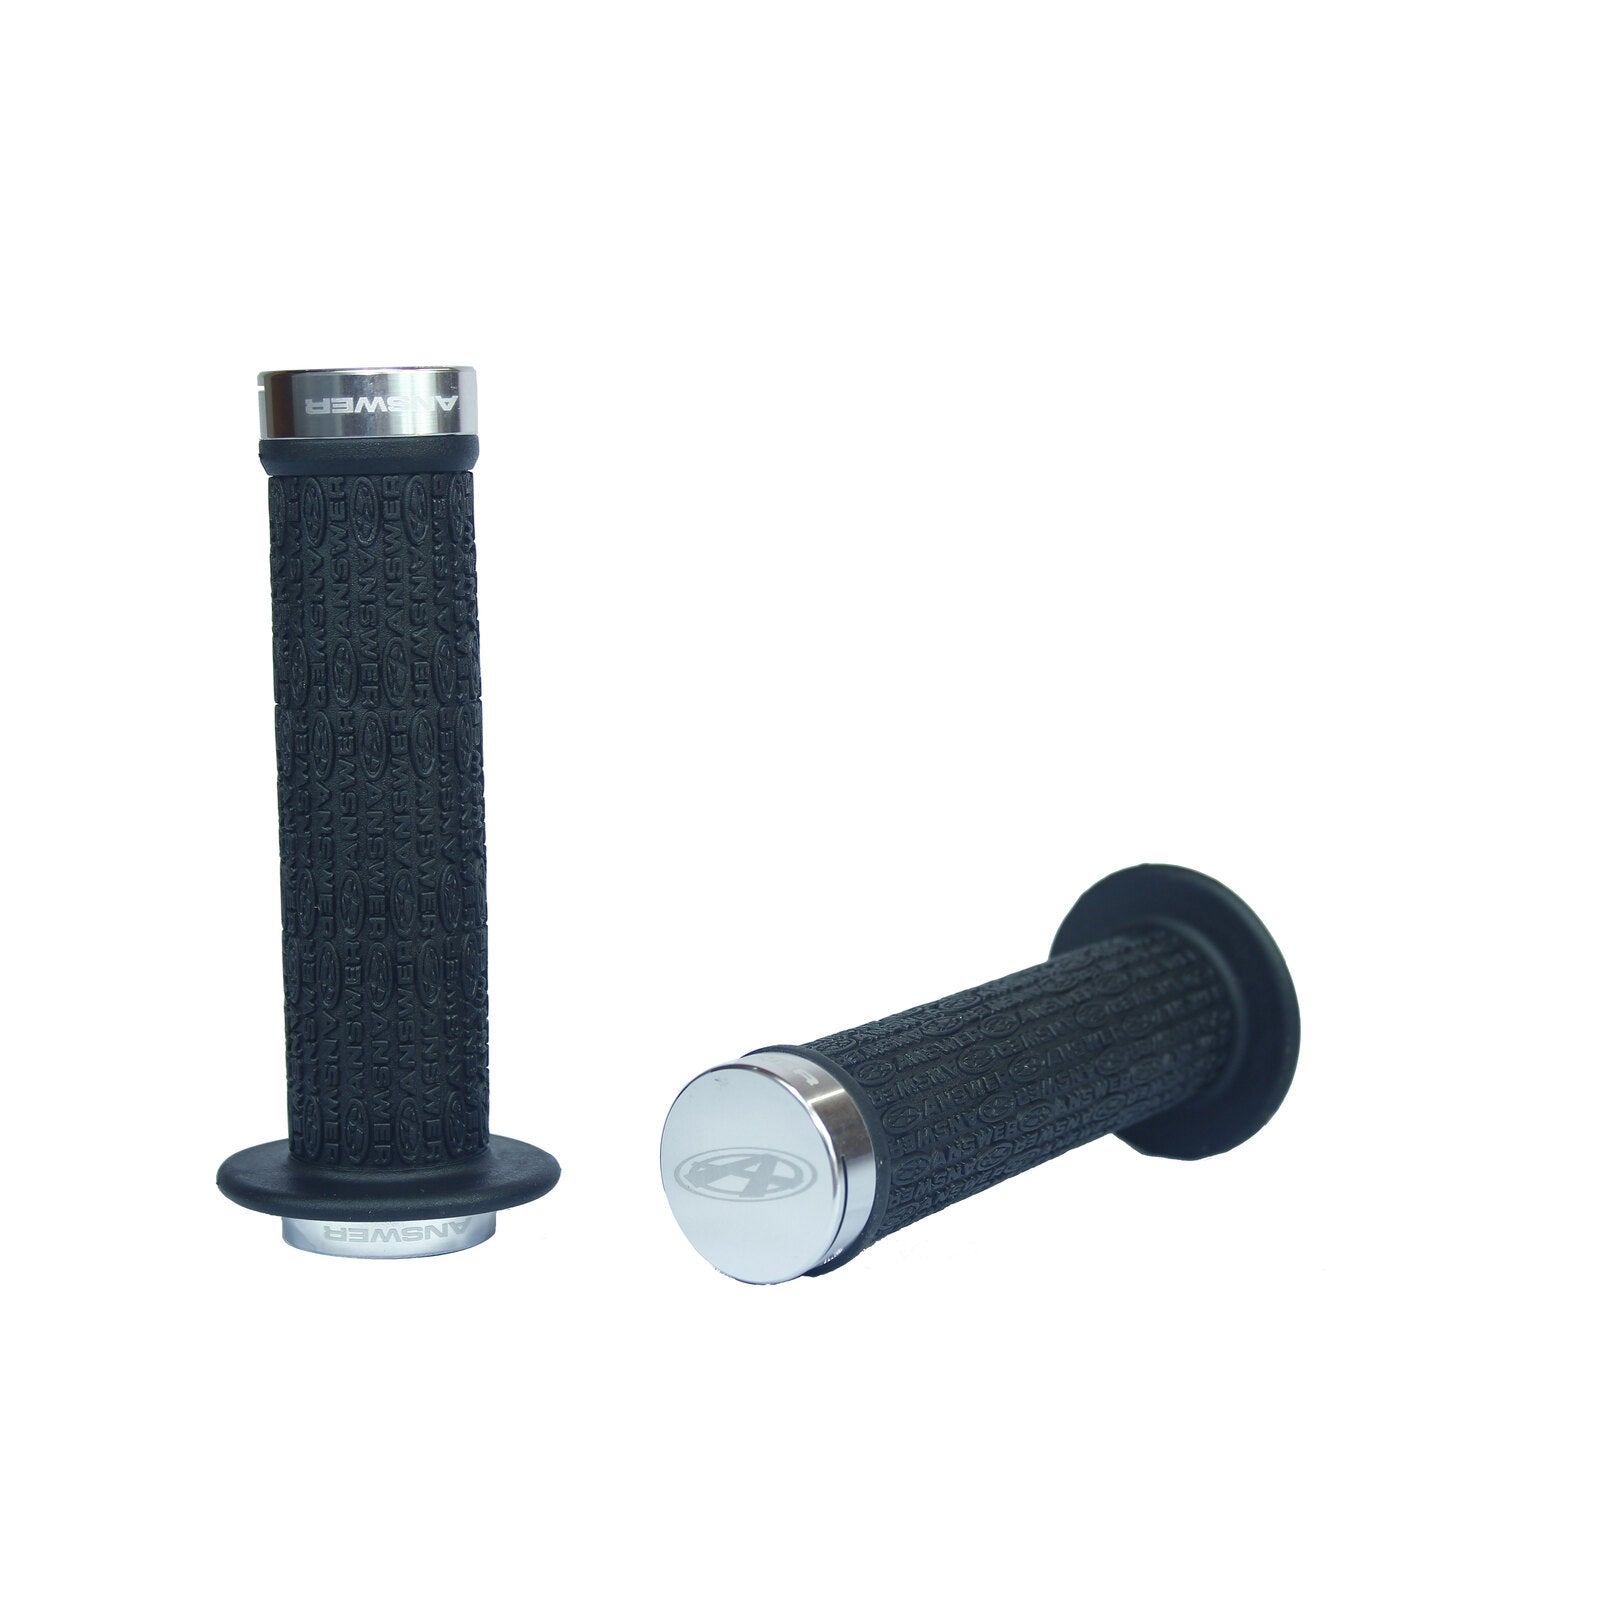 A pair of Answer Pro Lock-On Flanged Grips on a white background, perfect for race bikes.